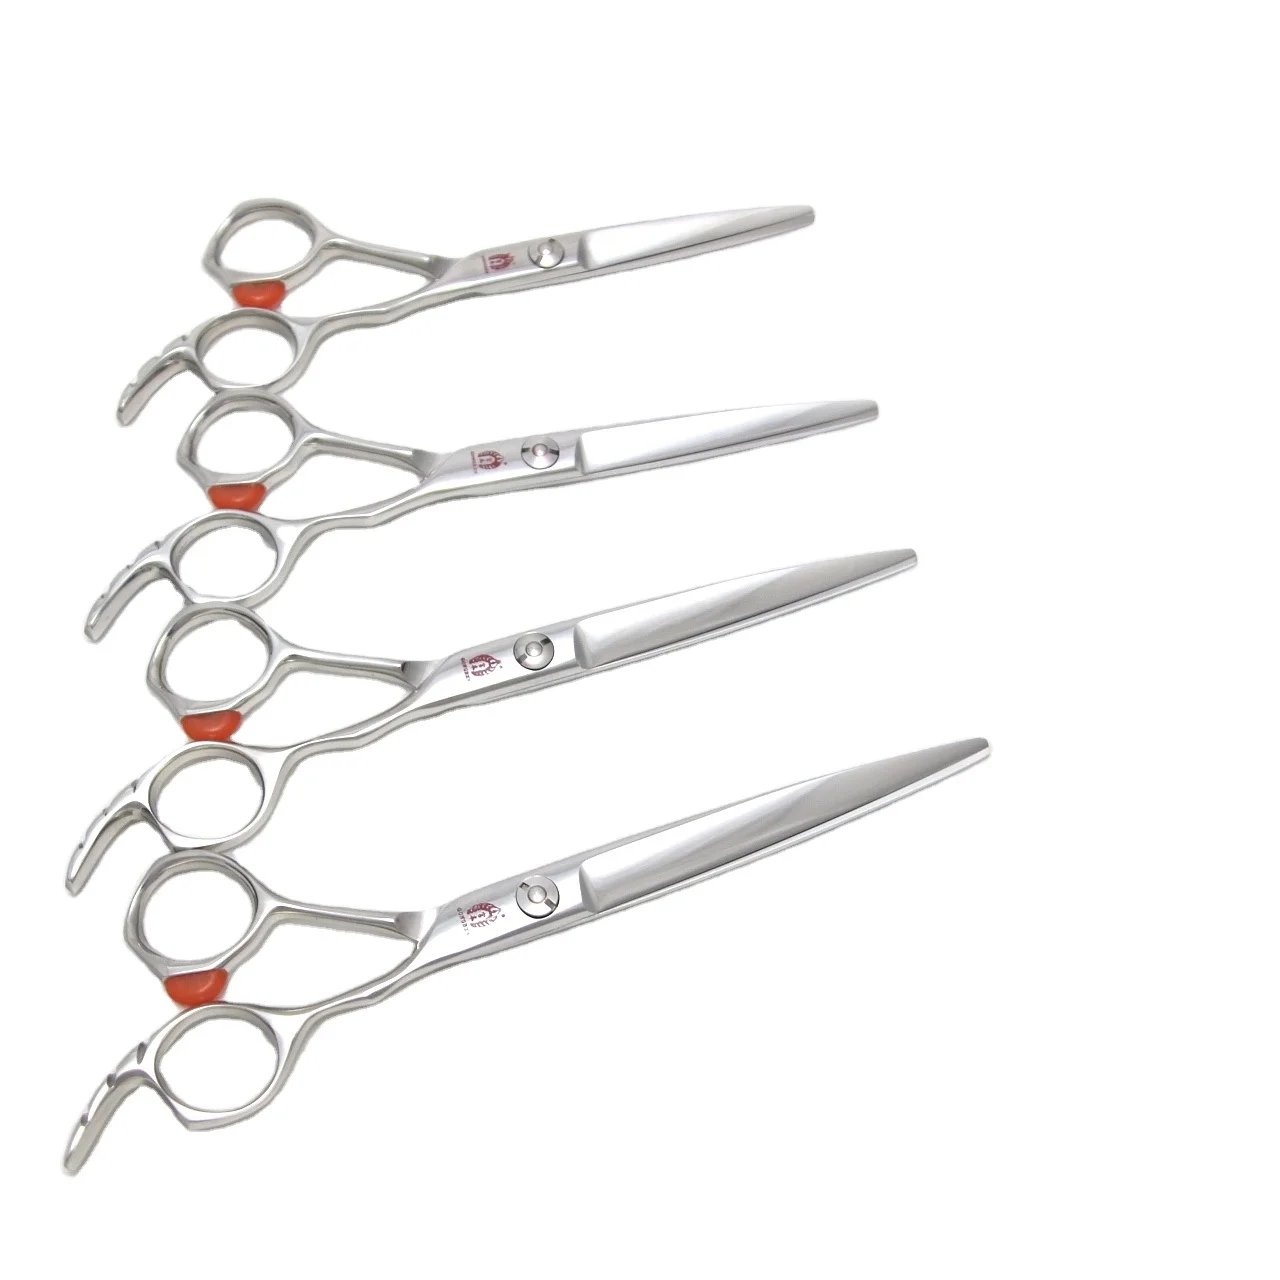 

High quality 440c Japanese stainless steel professional hair barber cutting scissors